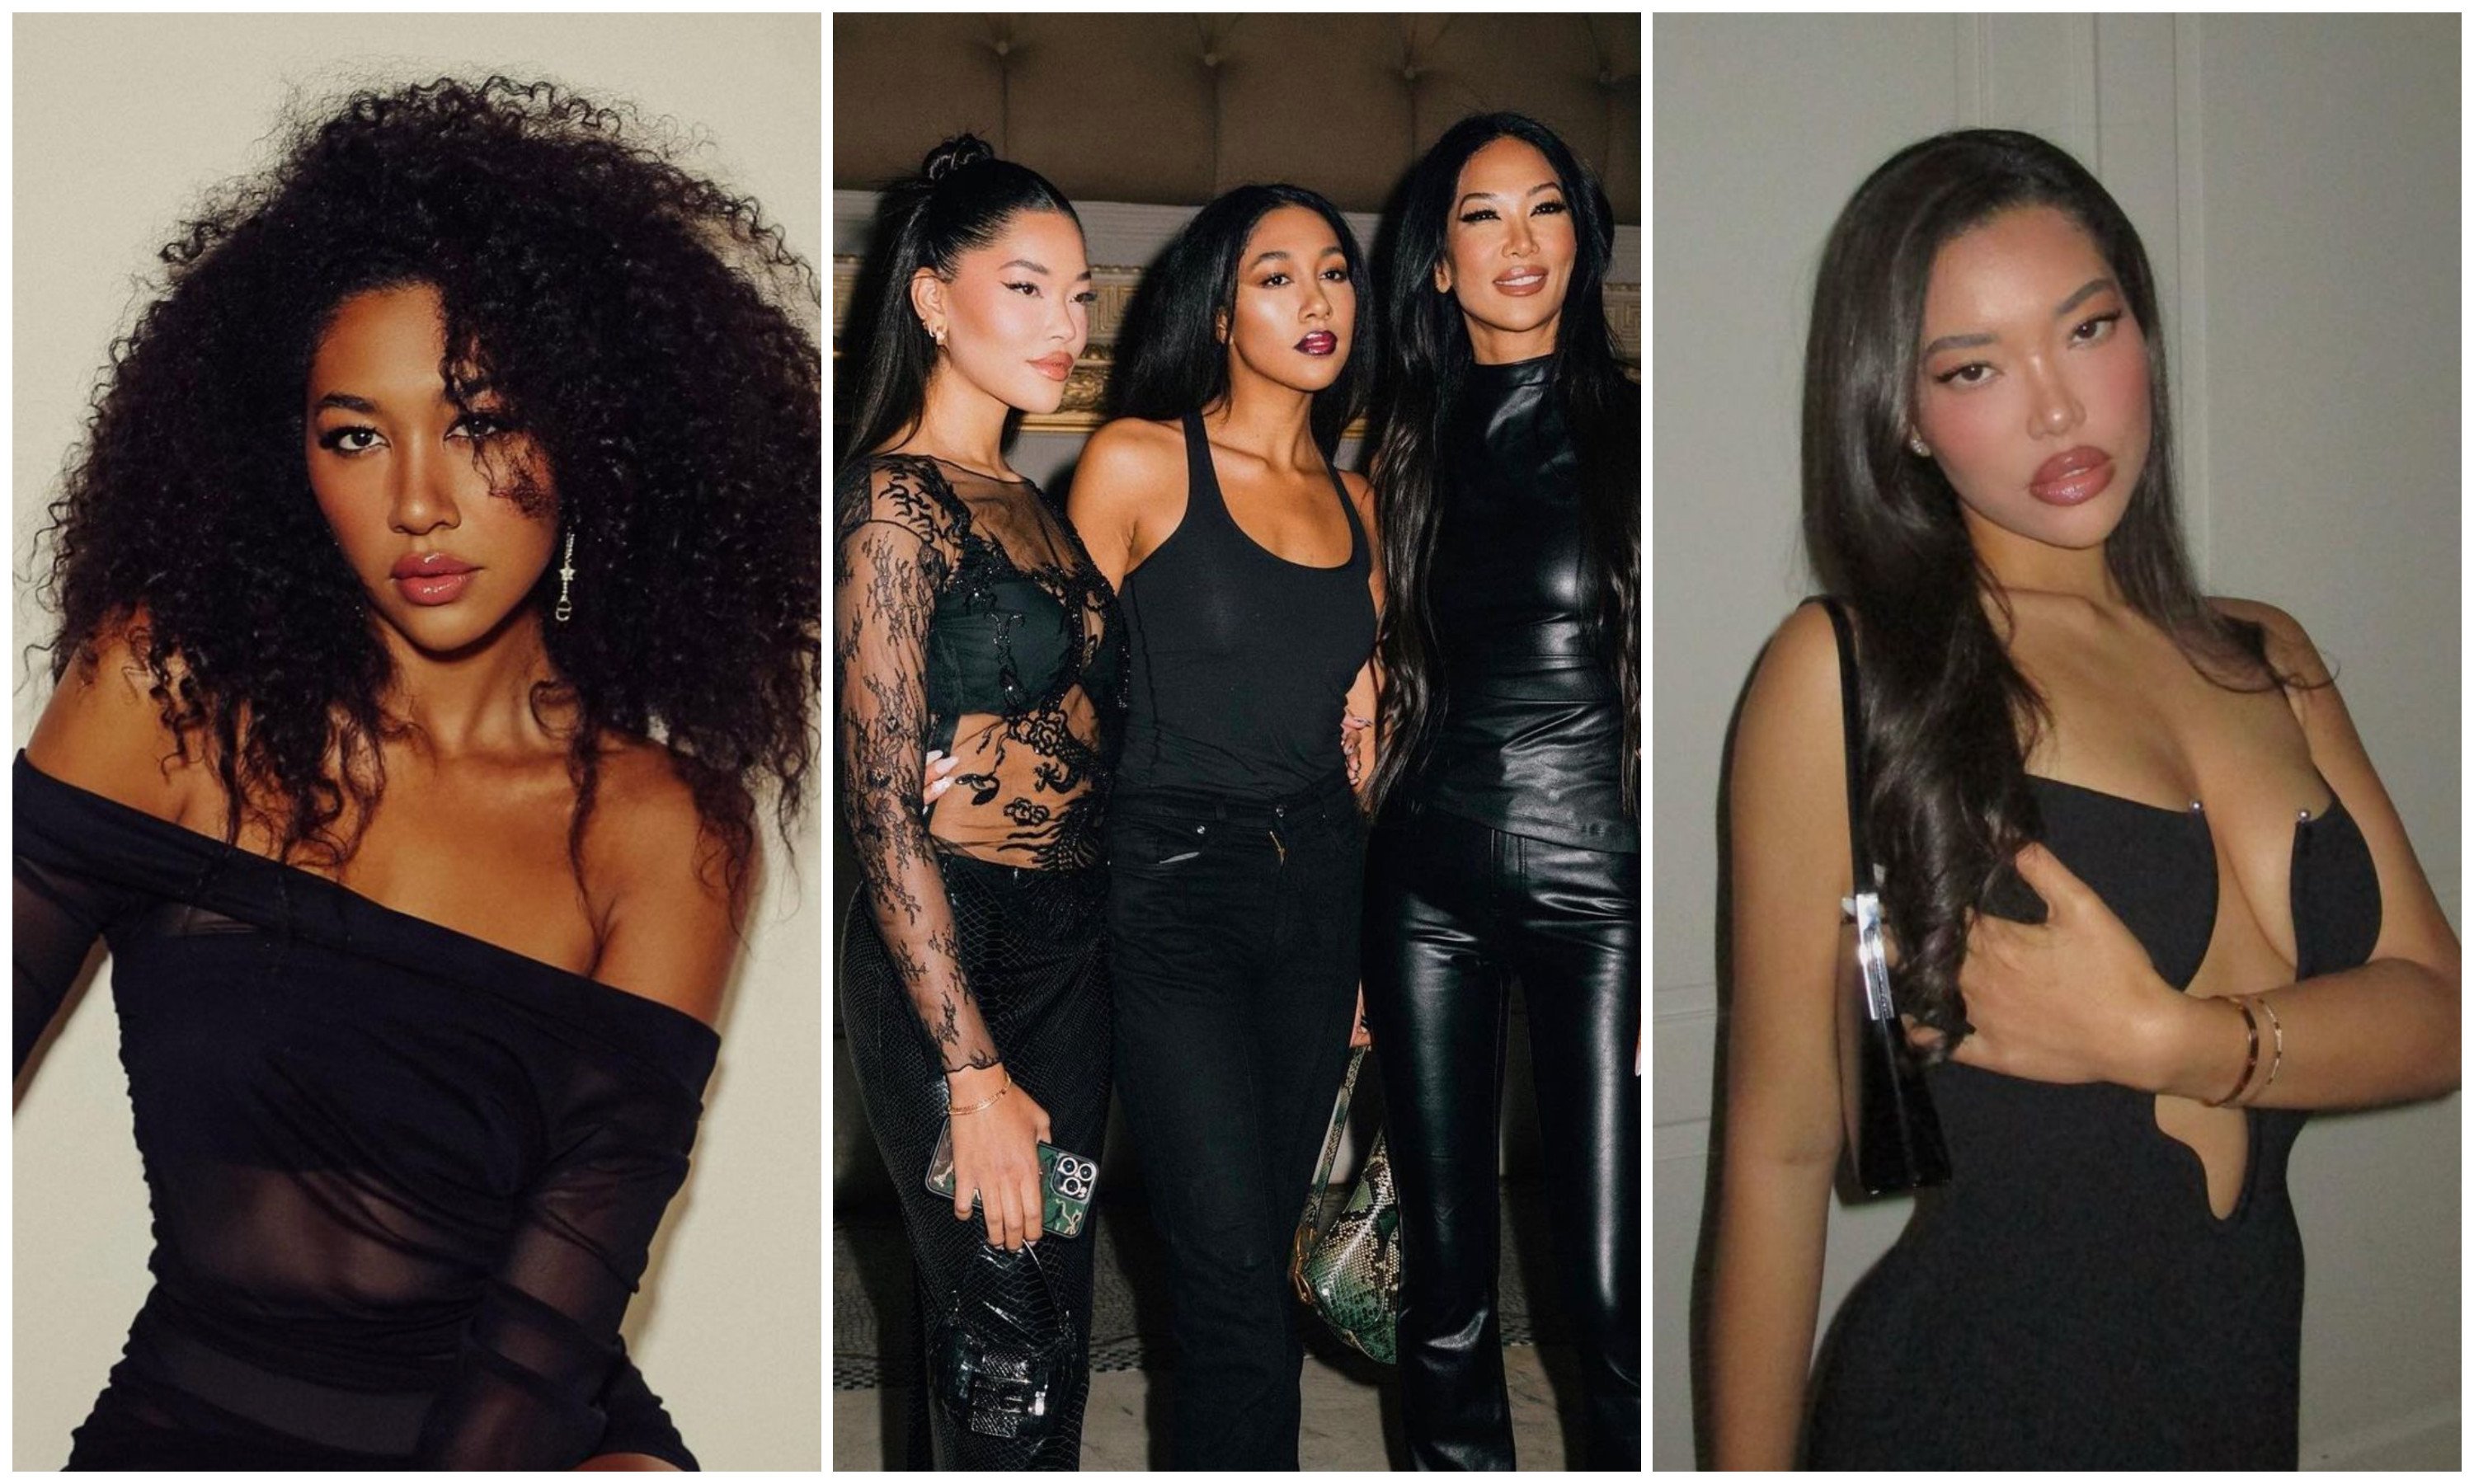 Aoki and Ming Lee Simmons are the daughters of fashion icon Kimora Lee Simmons and Def Jam founder Russell Simmons. Photos: @aokileesimmons, @kimoraleesimmons, @mingleesimmons/Instagram